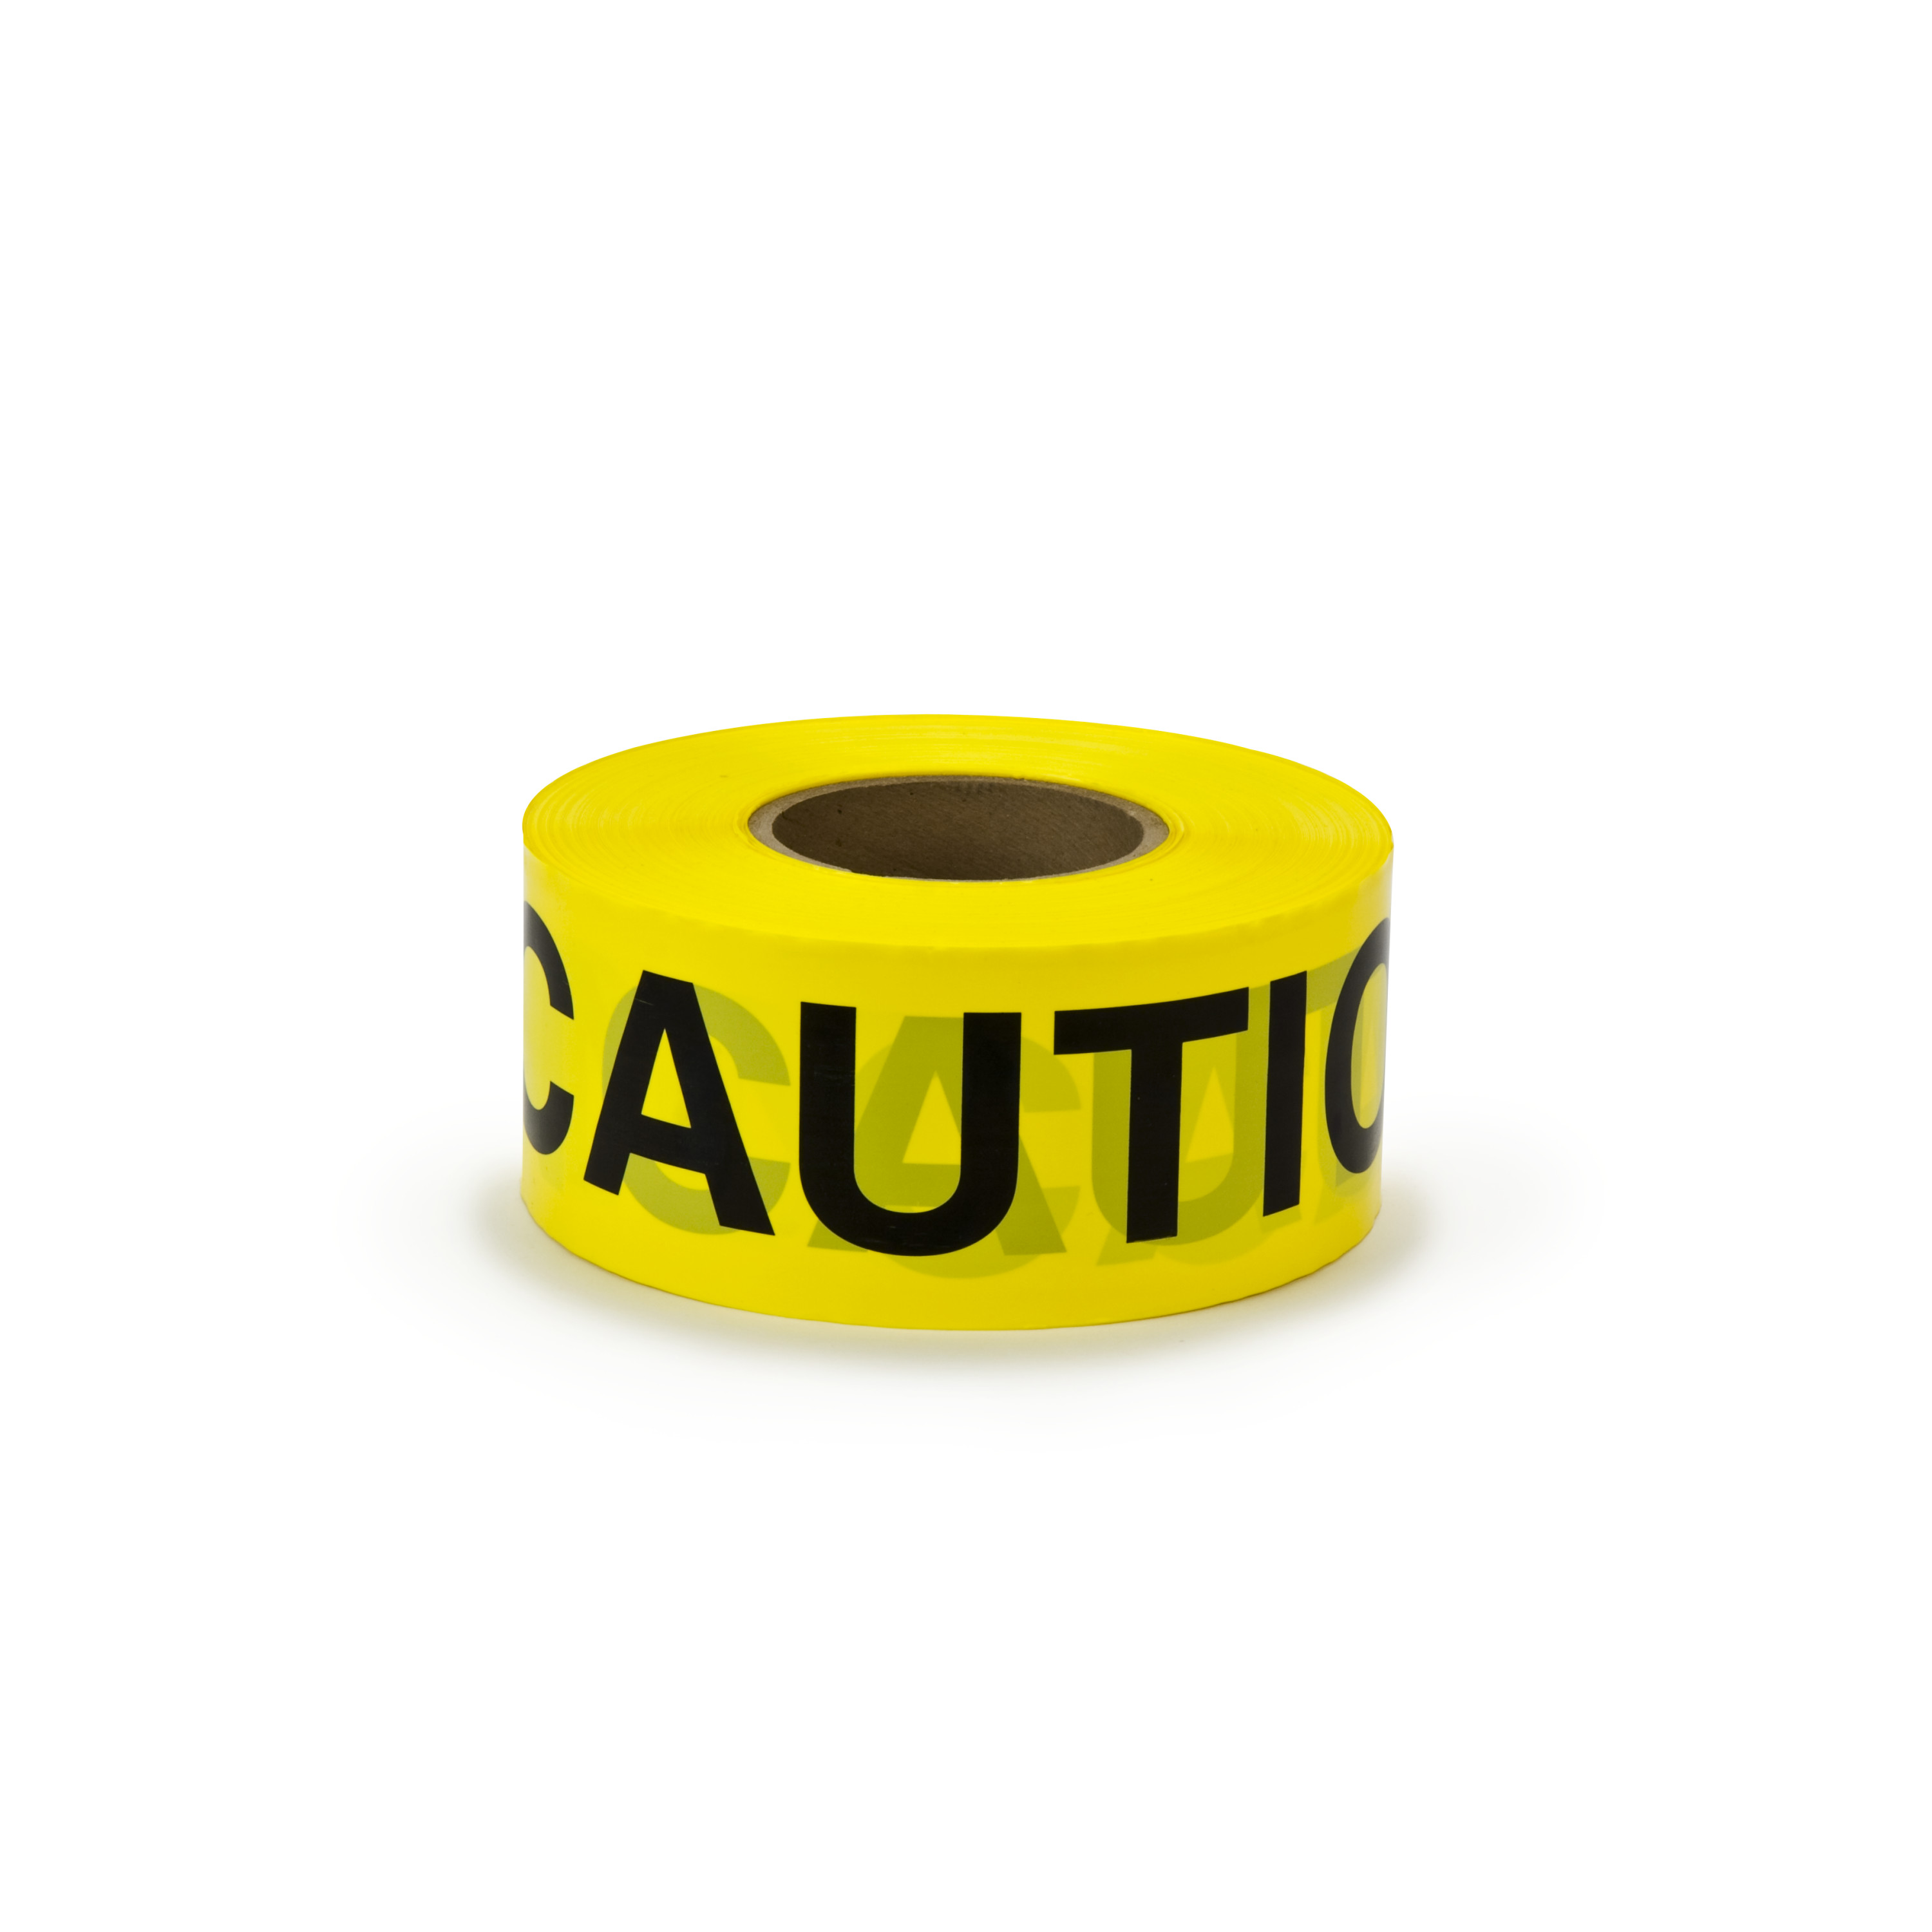 Scotch® Barricade Tape 330, CAUTION, 3 in x 1000 ft, Yellow, 8
rolls/Case